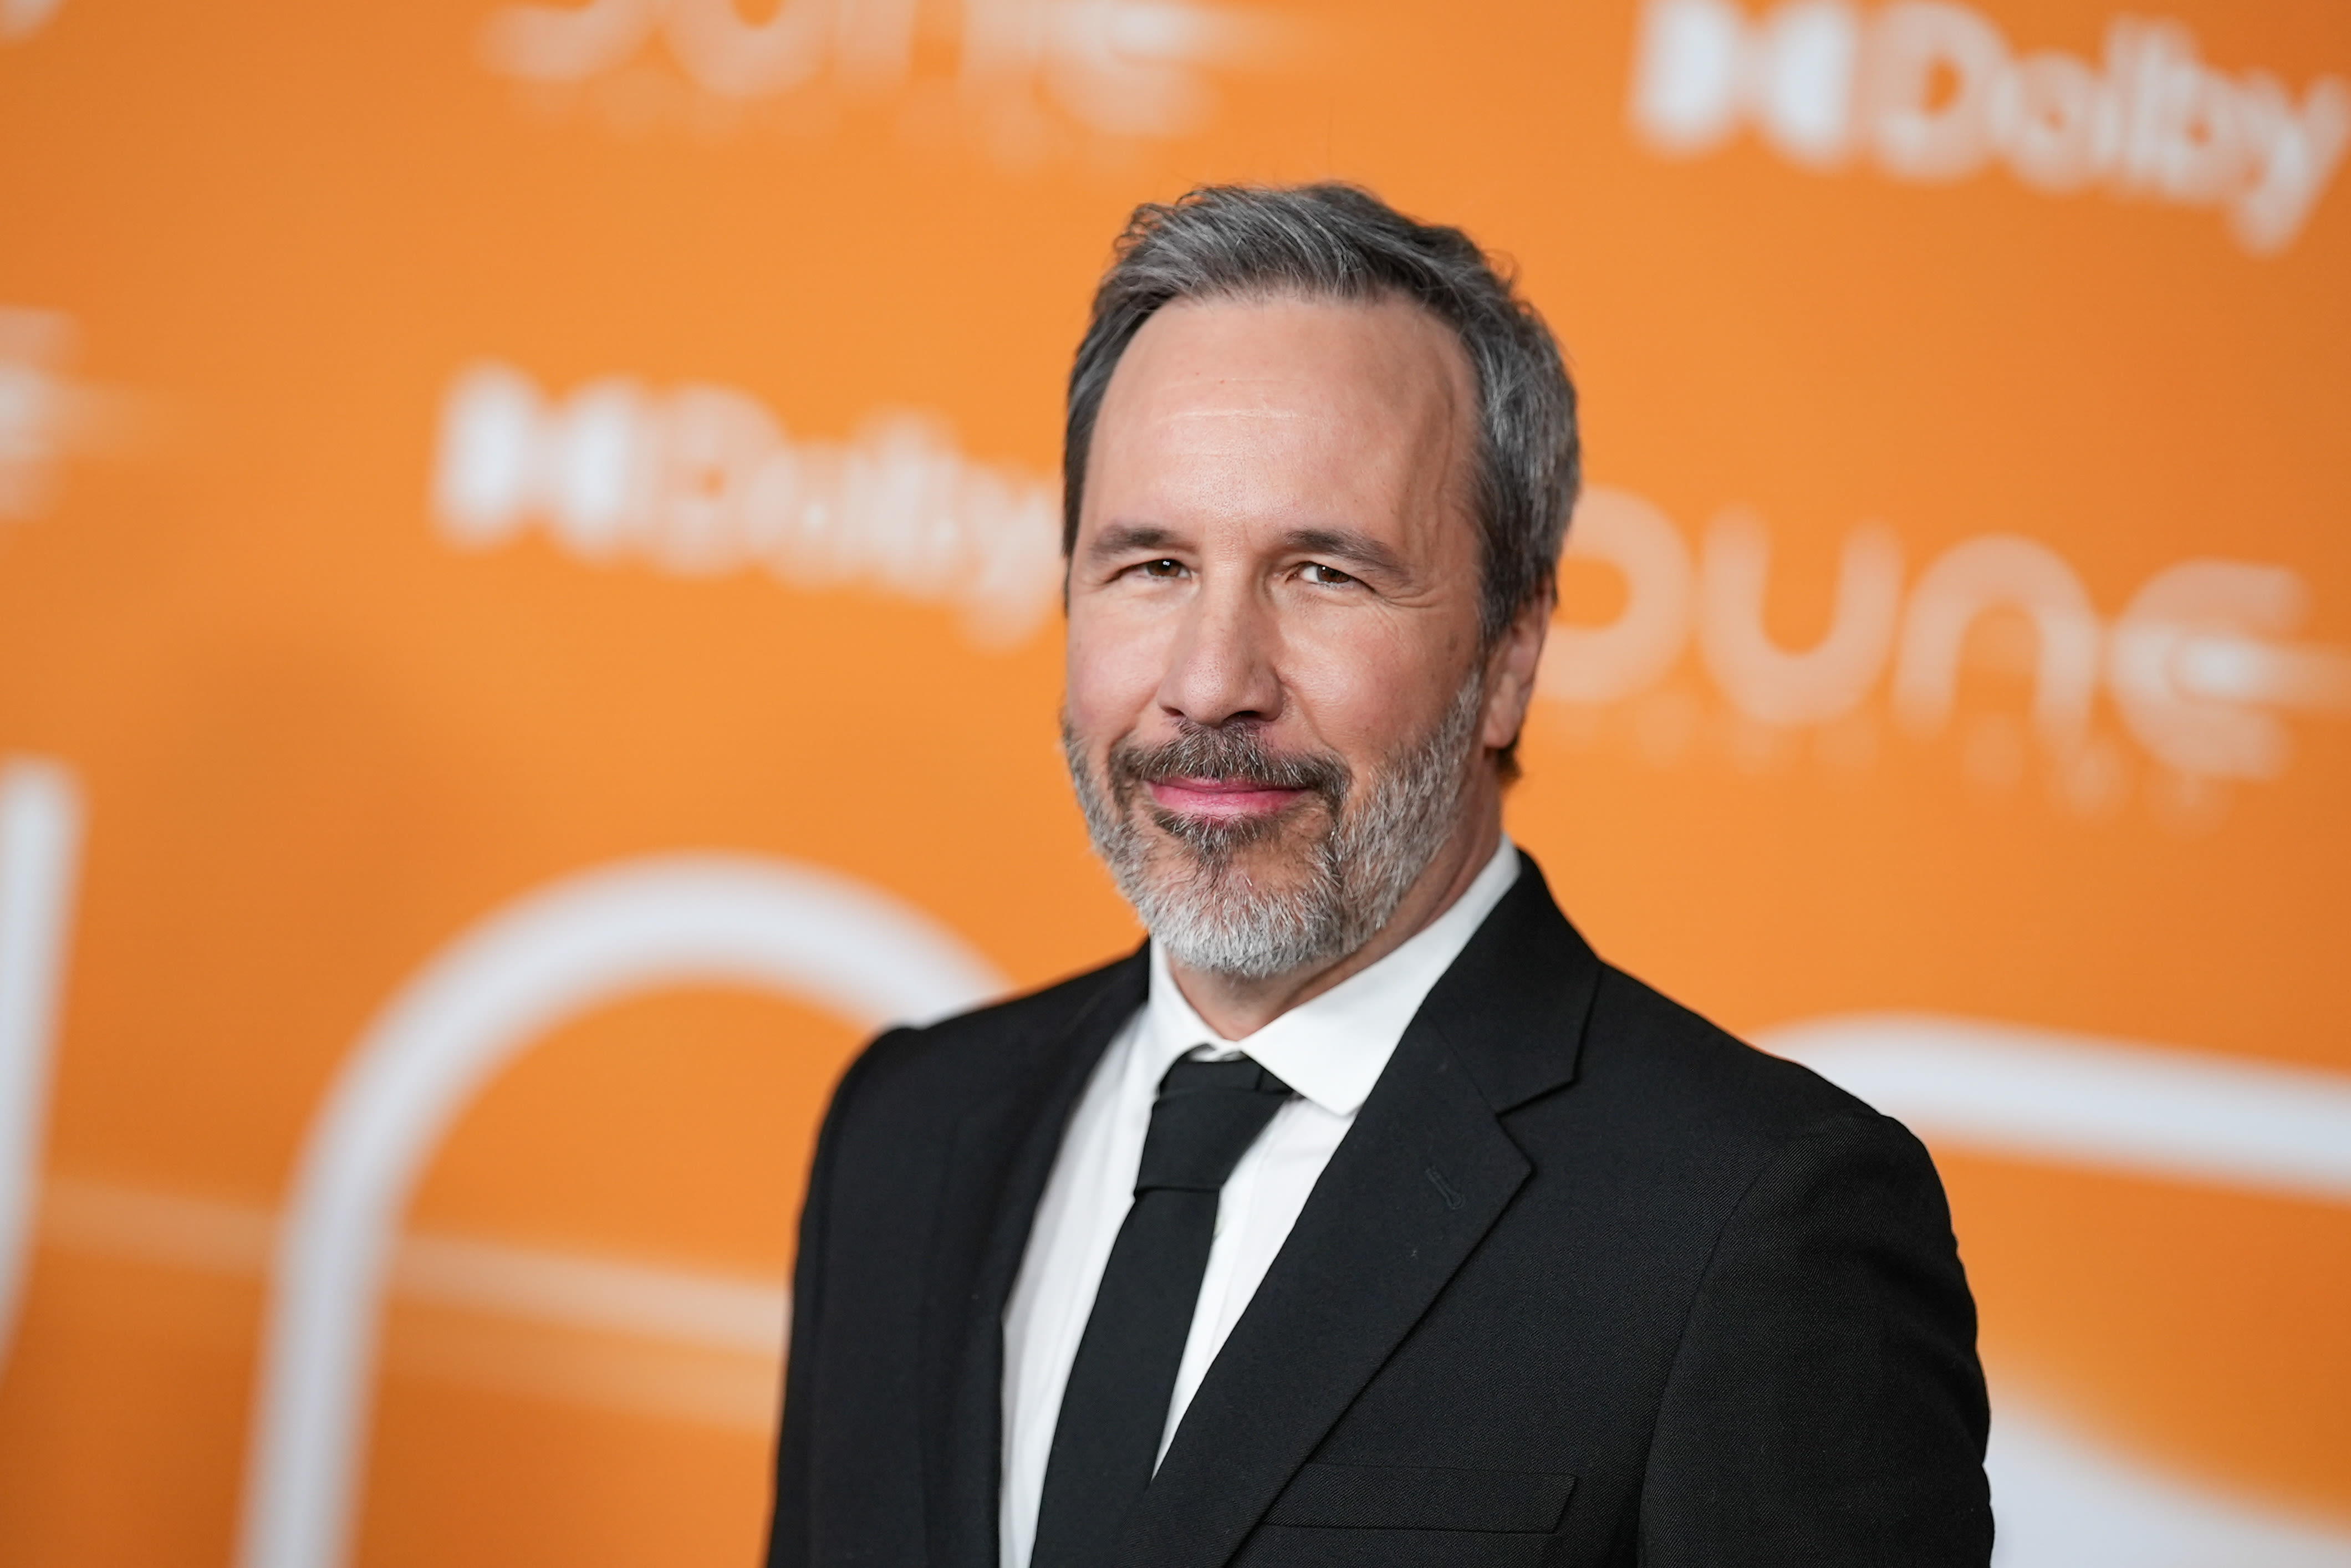 Denis Villeneuve Responds To Dismal Summer Box Office: “I’m Disappointed To Still Be Number One”